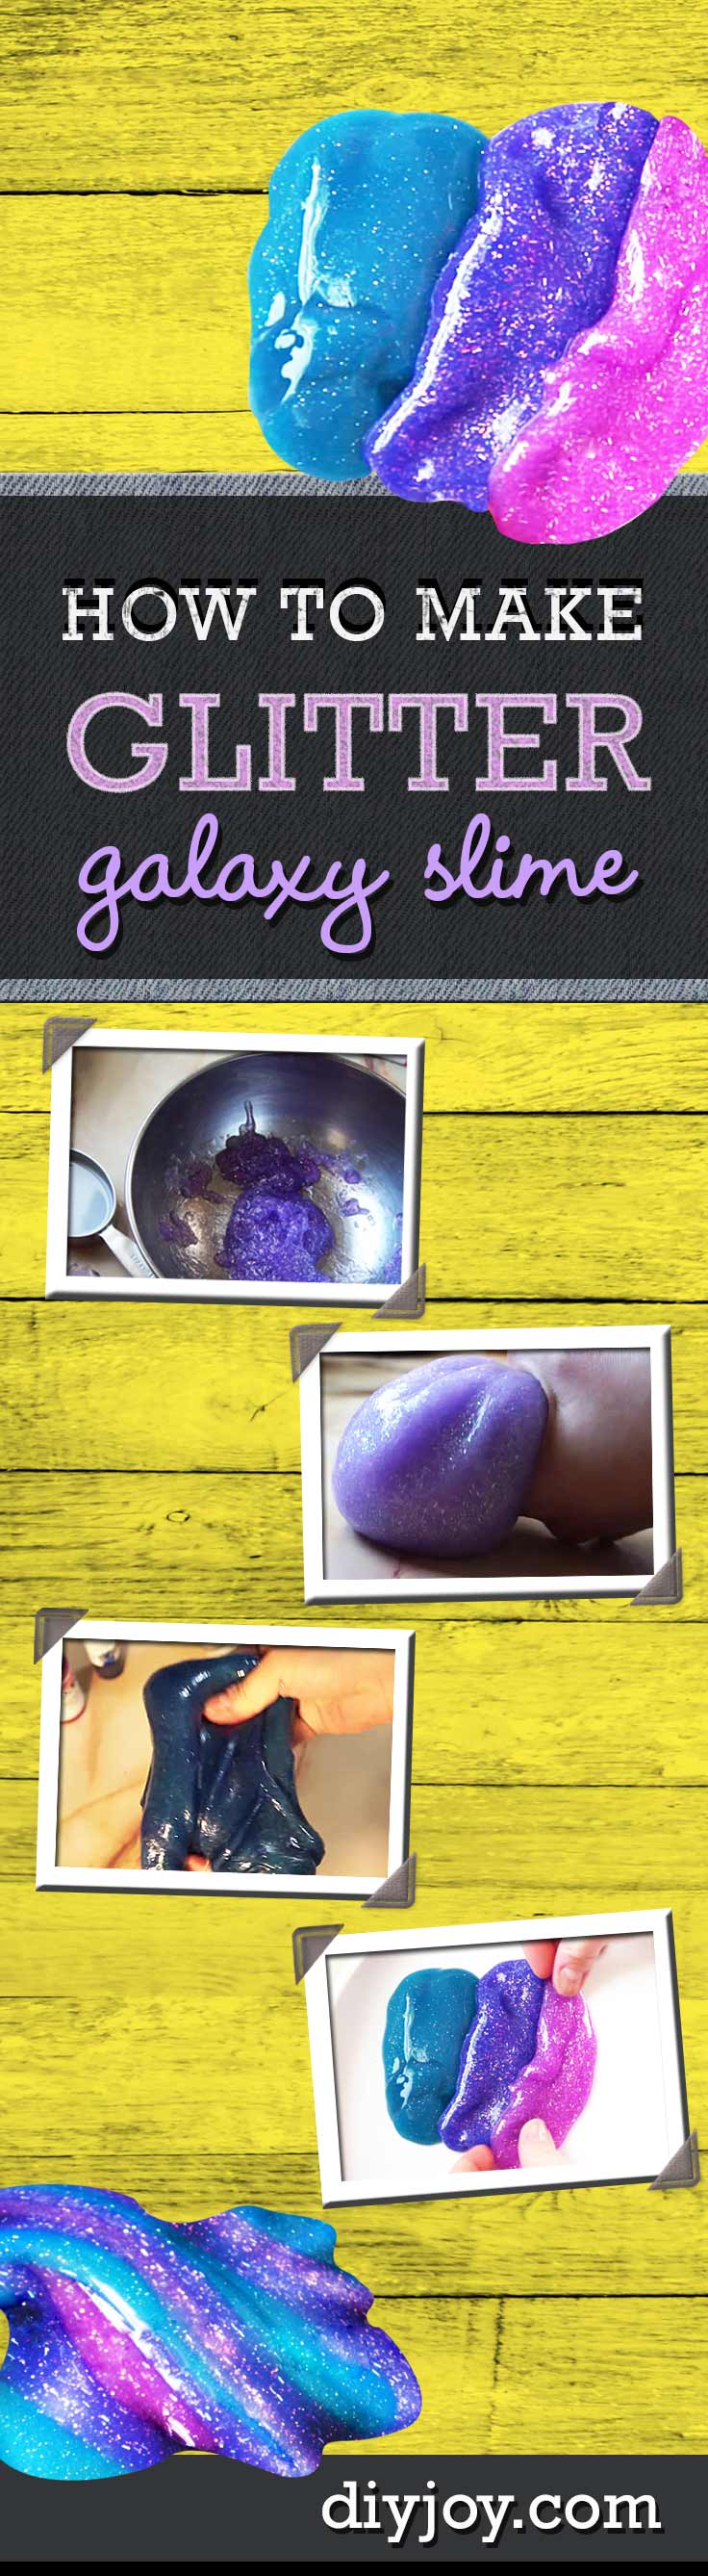 Easy Slime Recipes - How to Make Galaxy Slime Tutorial - Fun Crafts for Kids to Make at Home - DIY Galaxy Slime Recipe and Tutorial at DIY JOY